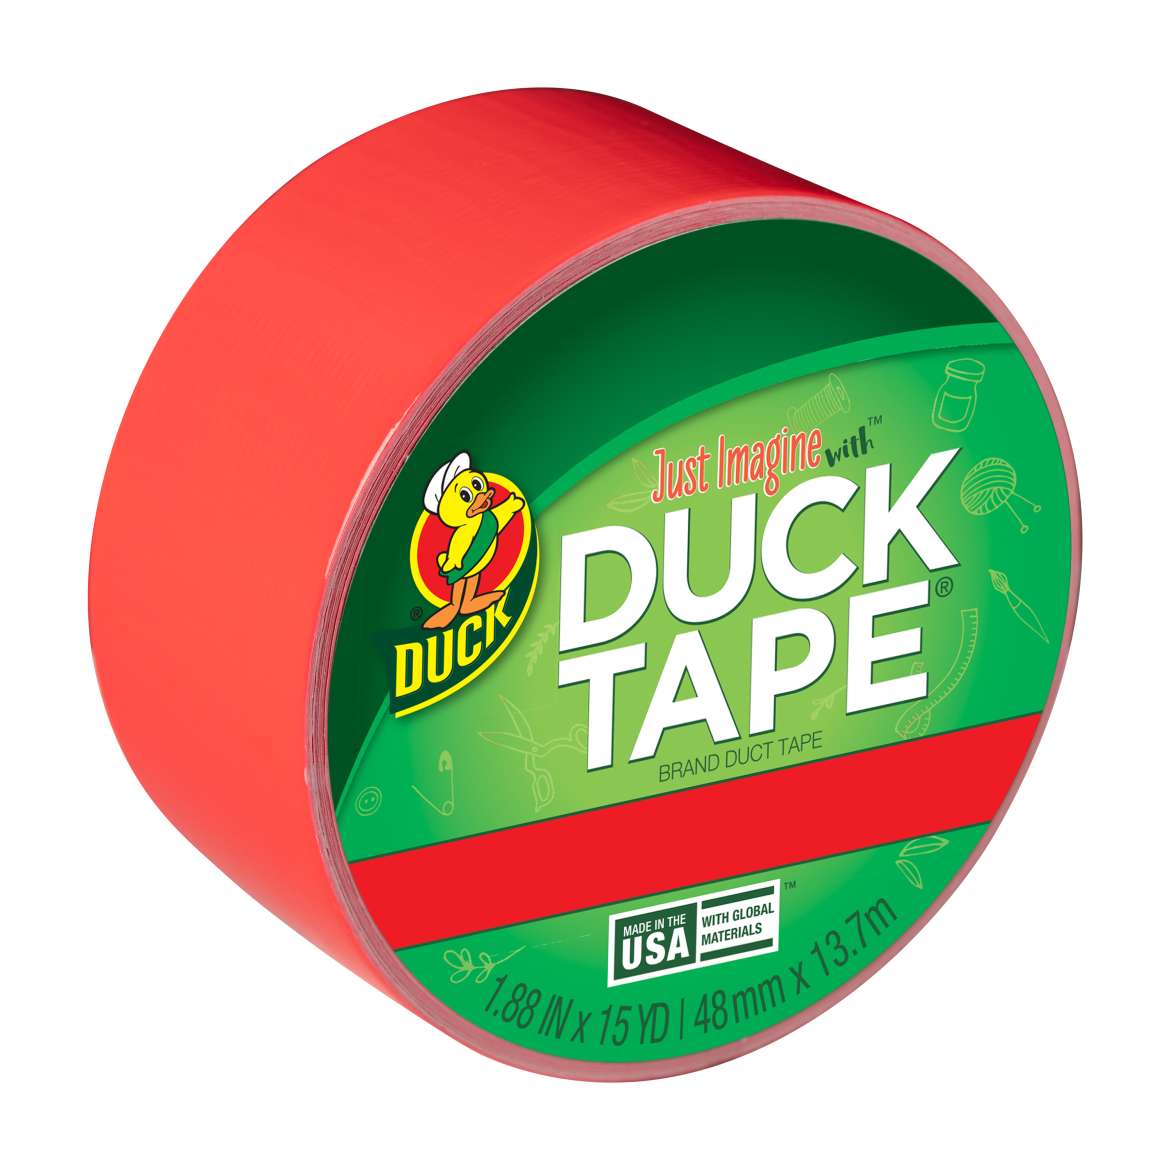 Color Duck Tape® Brand Duct Tape - Fluorescent Rose, 1.88 in. x 15 yd.